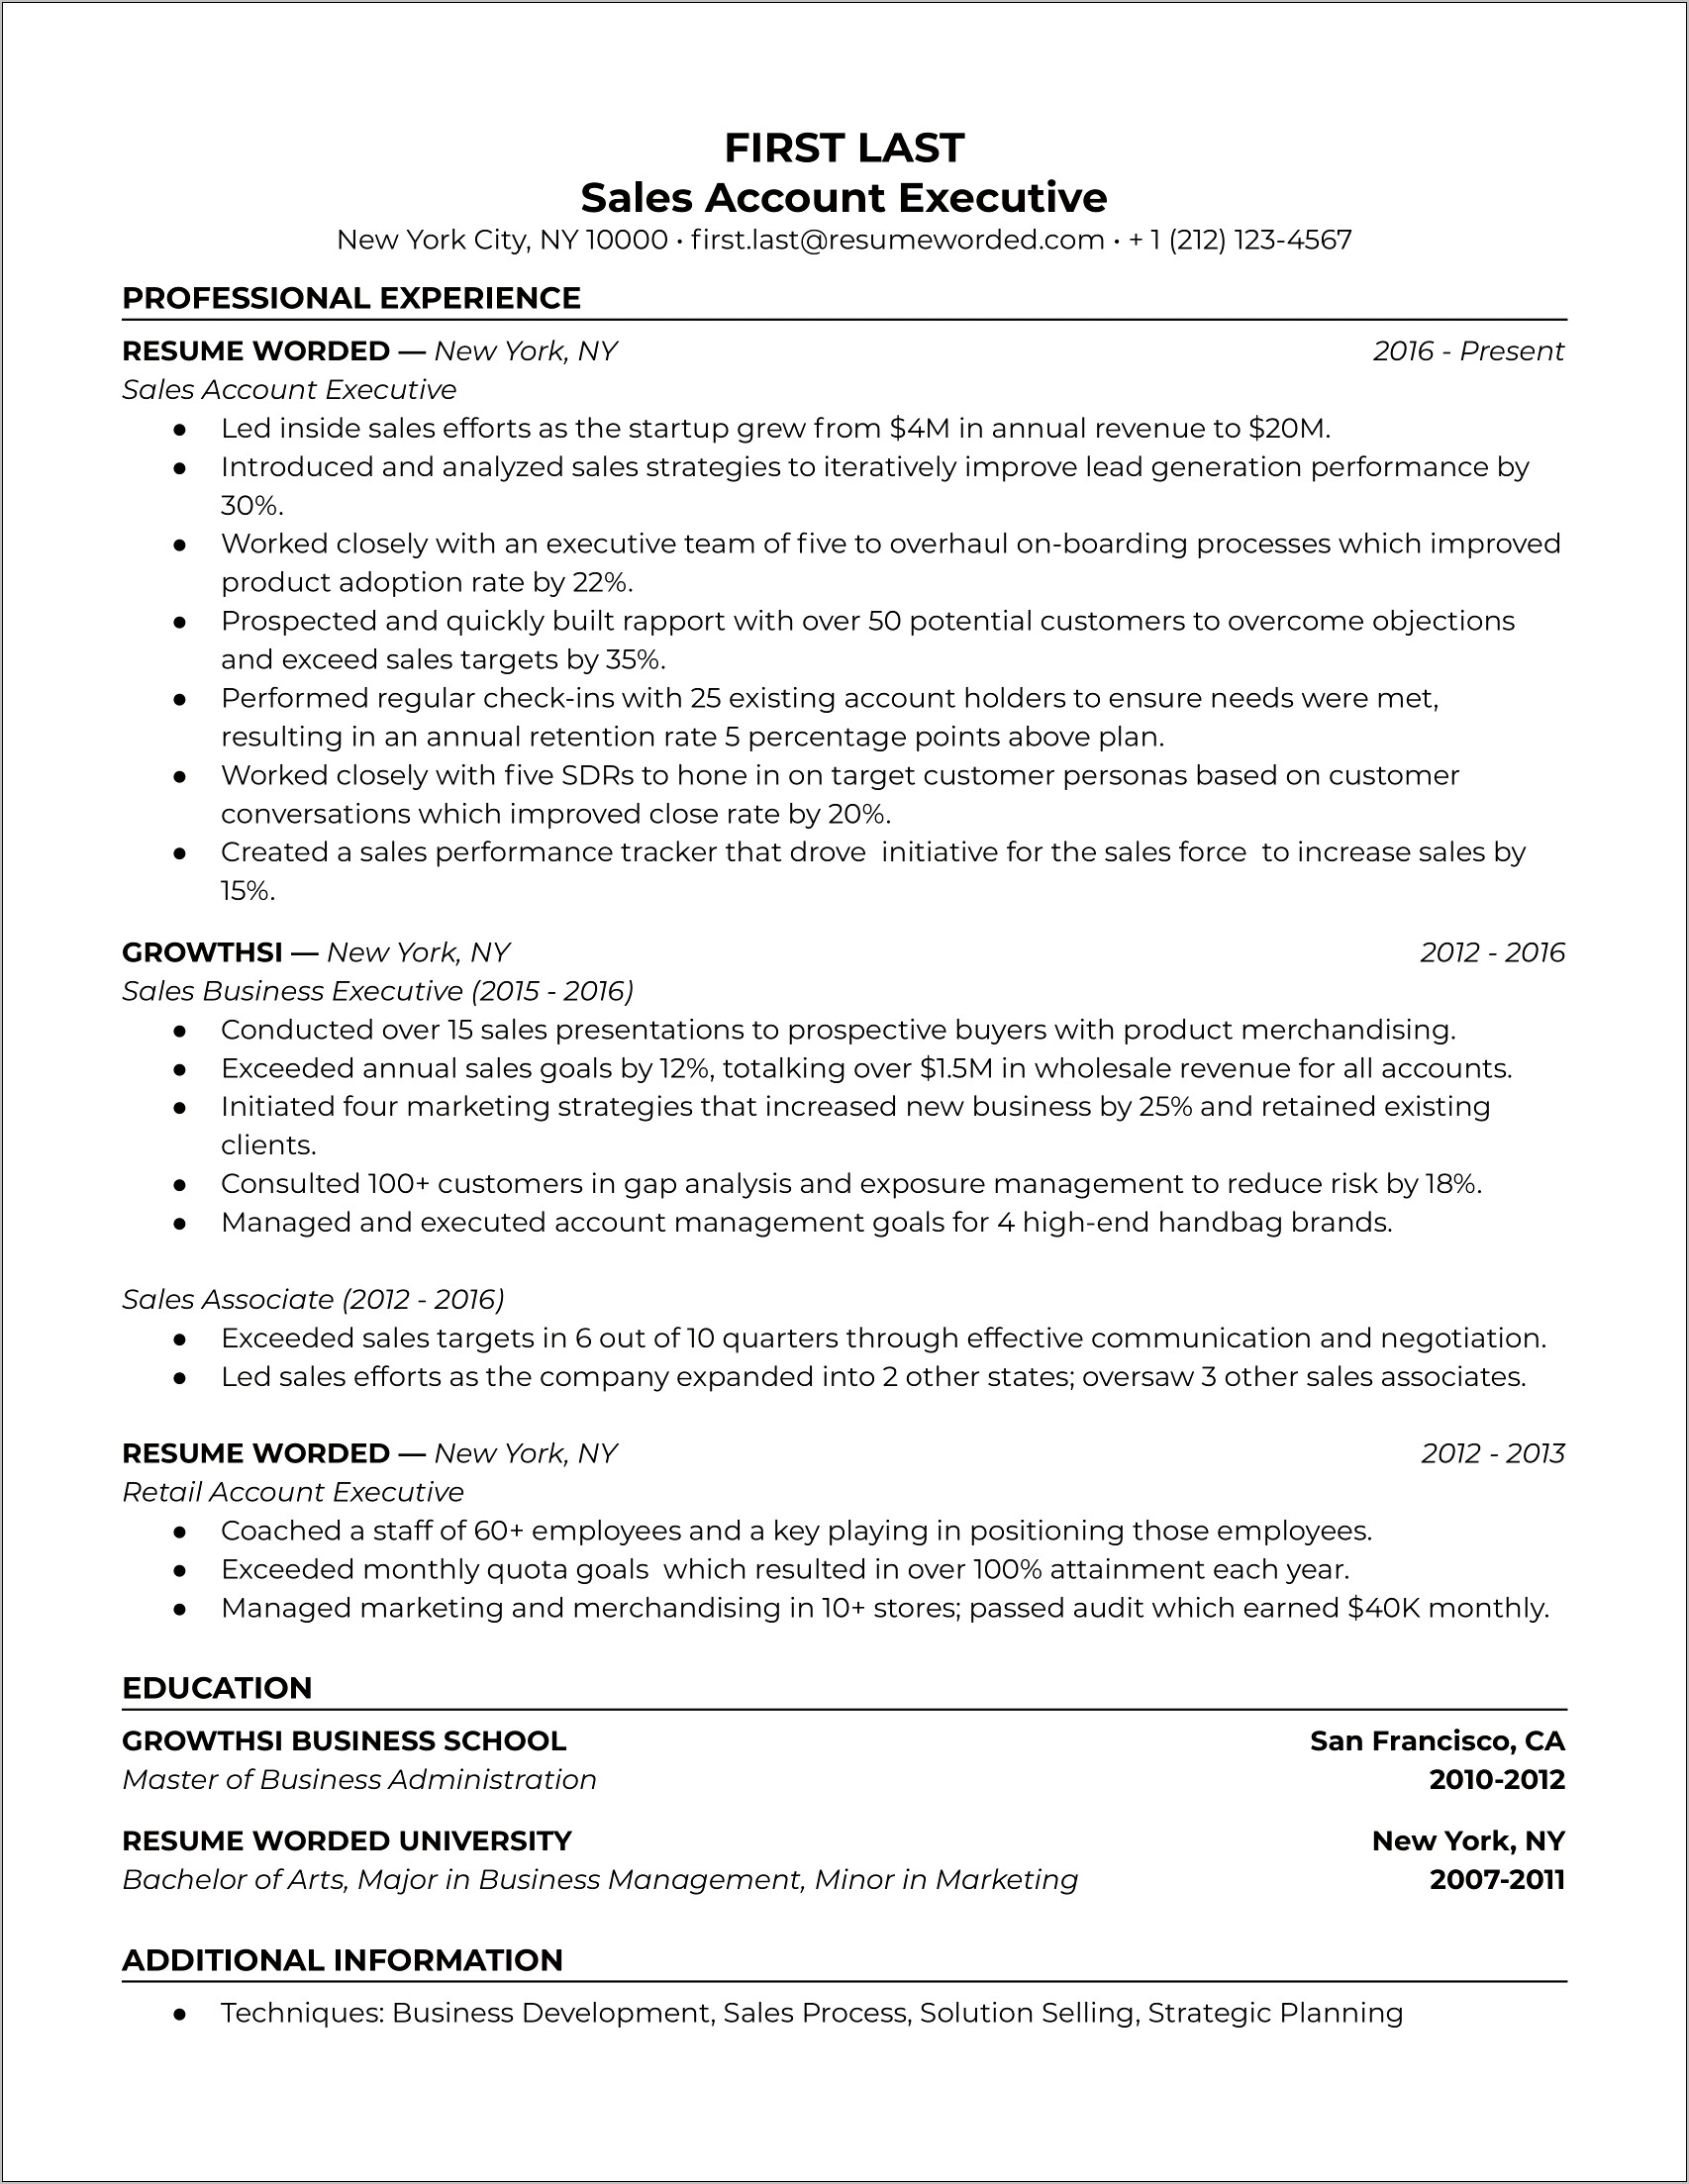 Resume Phrasing For Managing Others